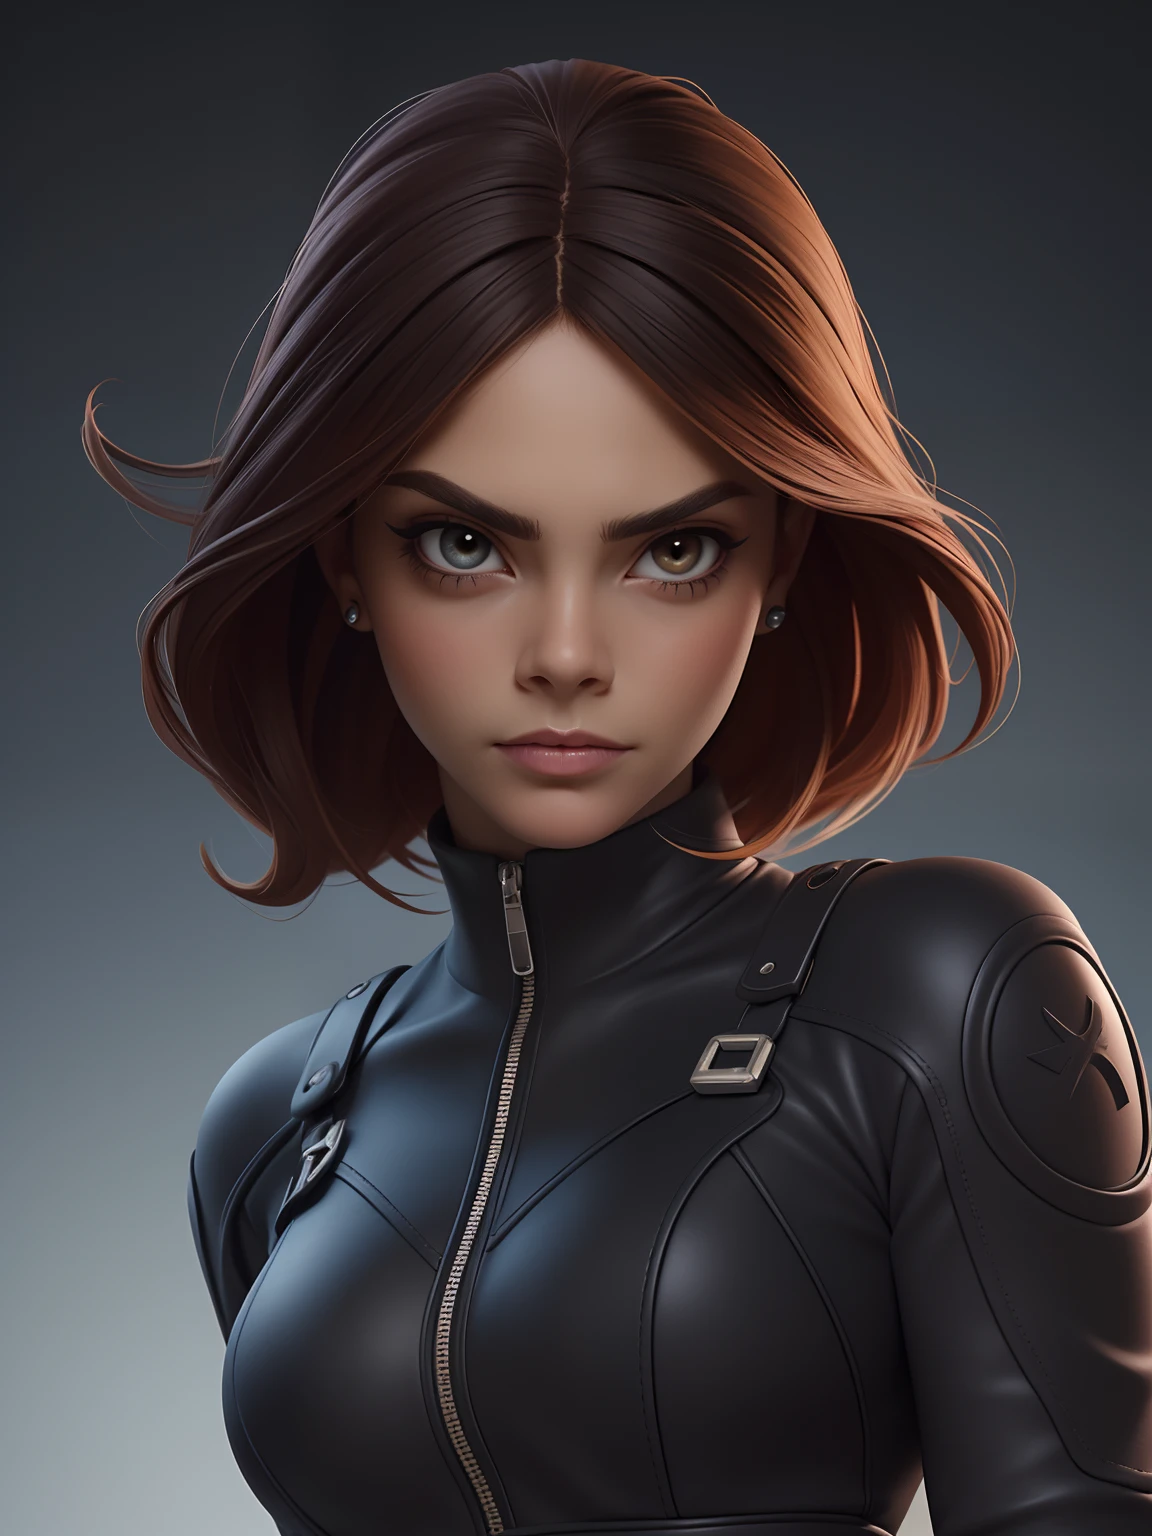 Un primer plano de una mujer vestida de black widow , Extremely detailed artgerm, ( ( black widow ) ), Cudesexyrobutts, Artgerm. High detail, character is in her natural pose, as seen on artgerm, IG model | Artgerm, super detailed render, Detailed artgerm, Artgerm Style. Red hair.